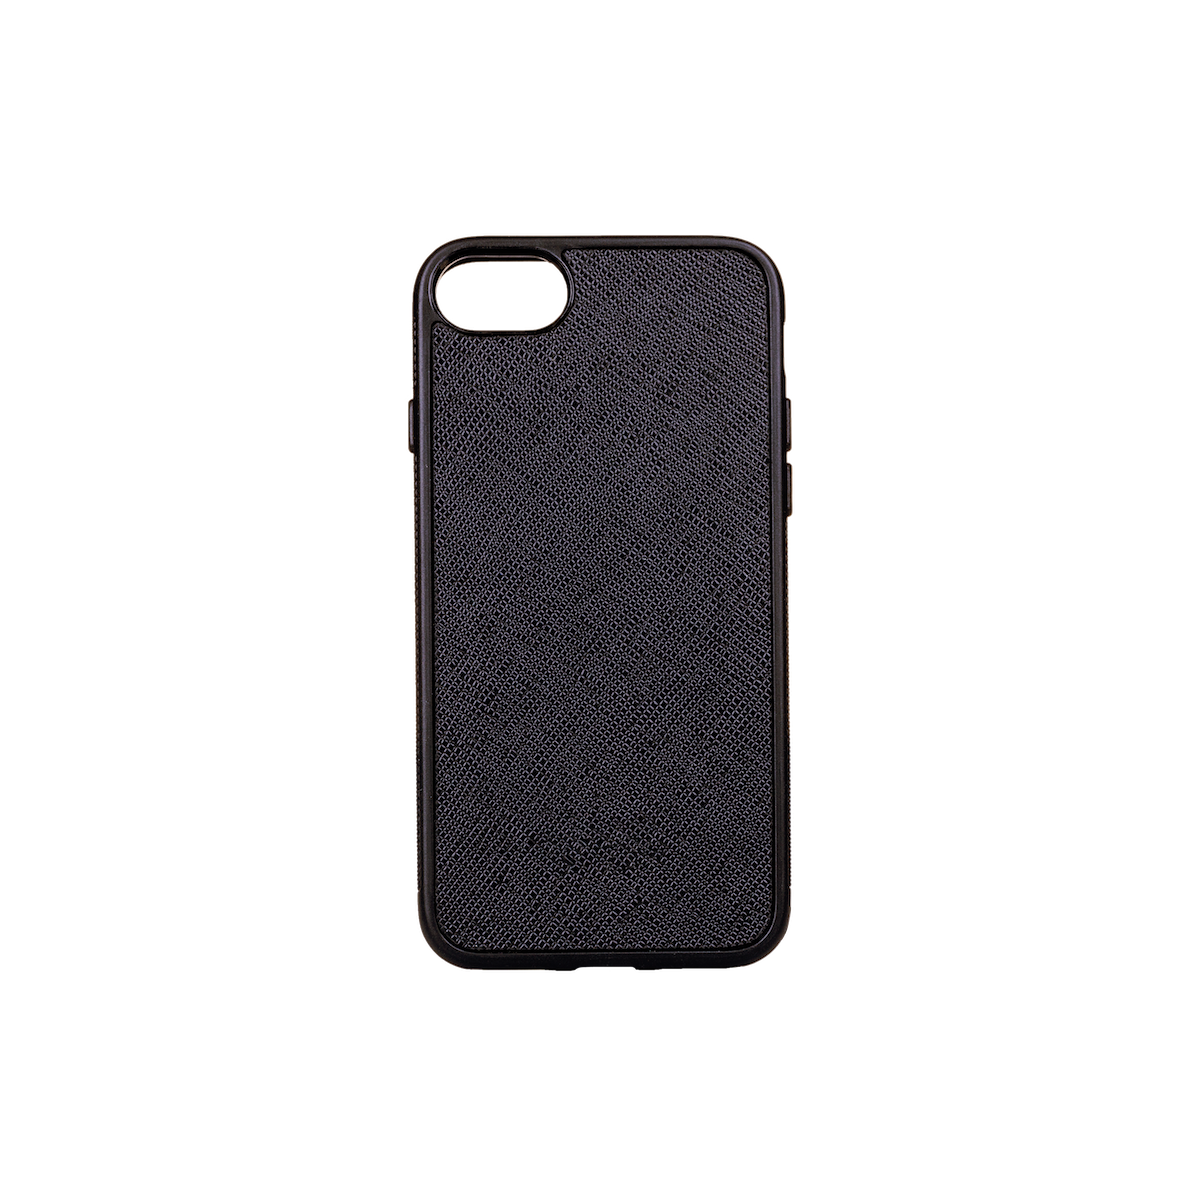 Iphone 7/8 Case, Saffiano Leather, MAISON JMK-VONMEL Luxe Gifts